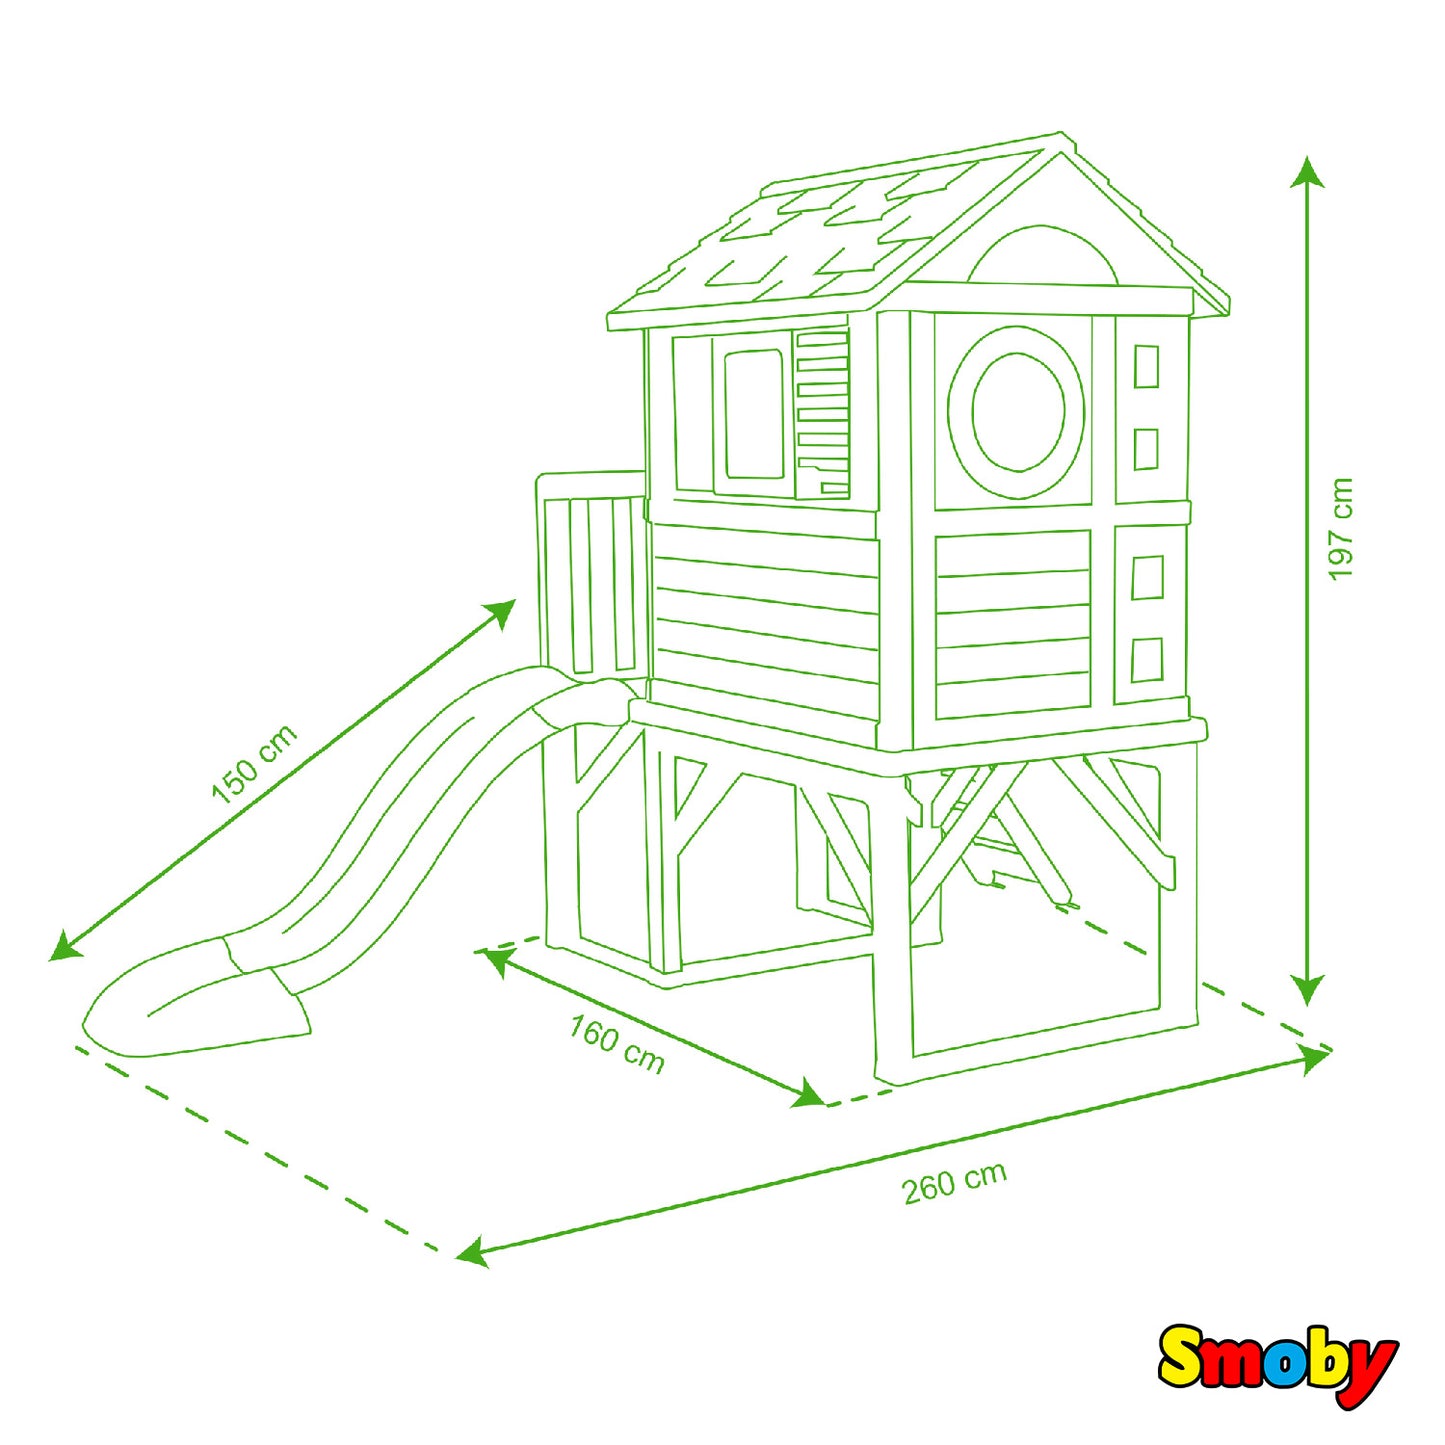 Smoby - Small house on stilts